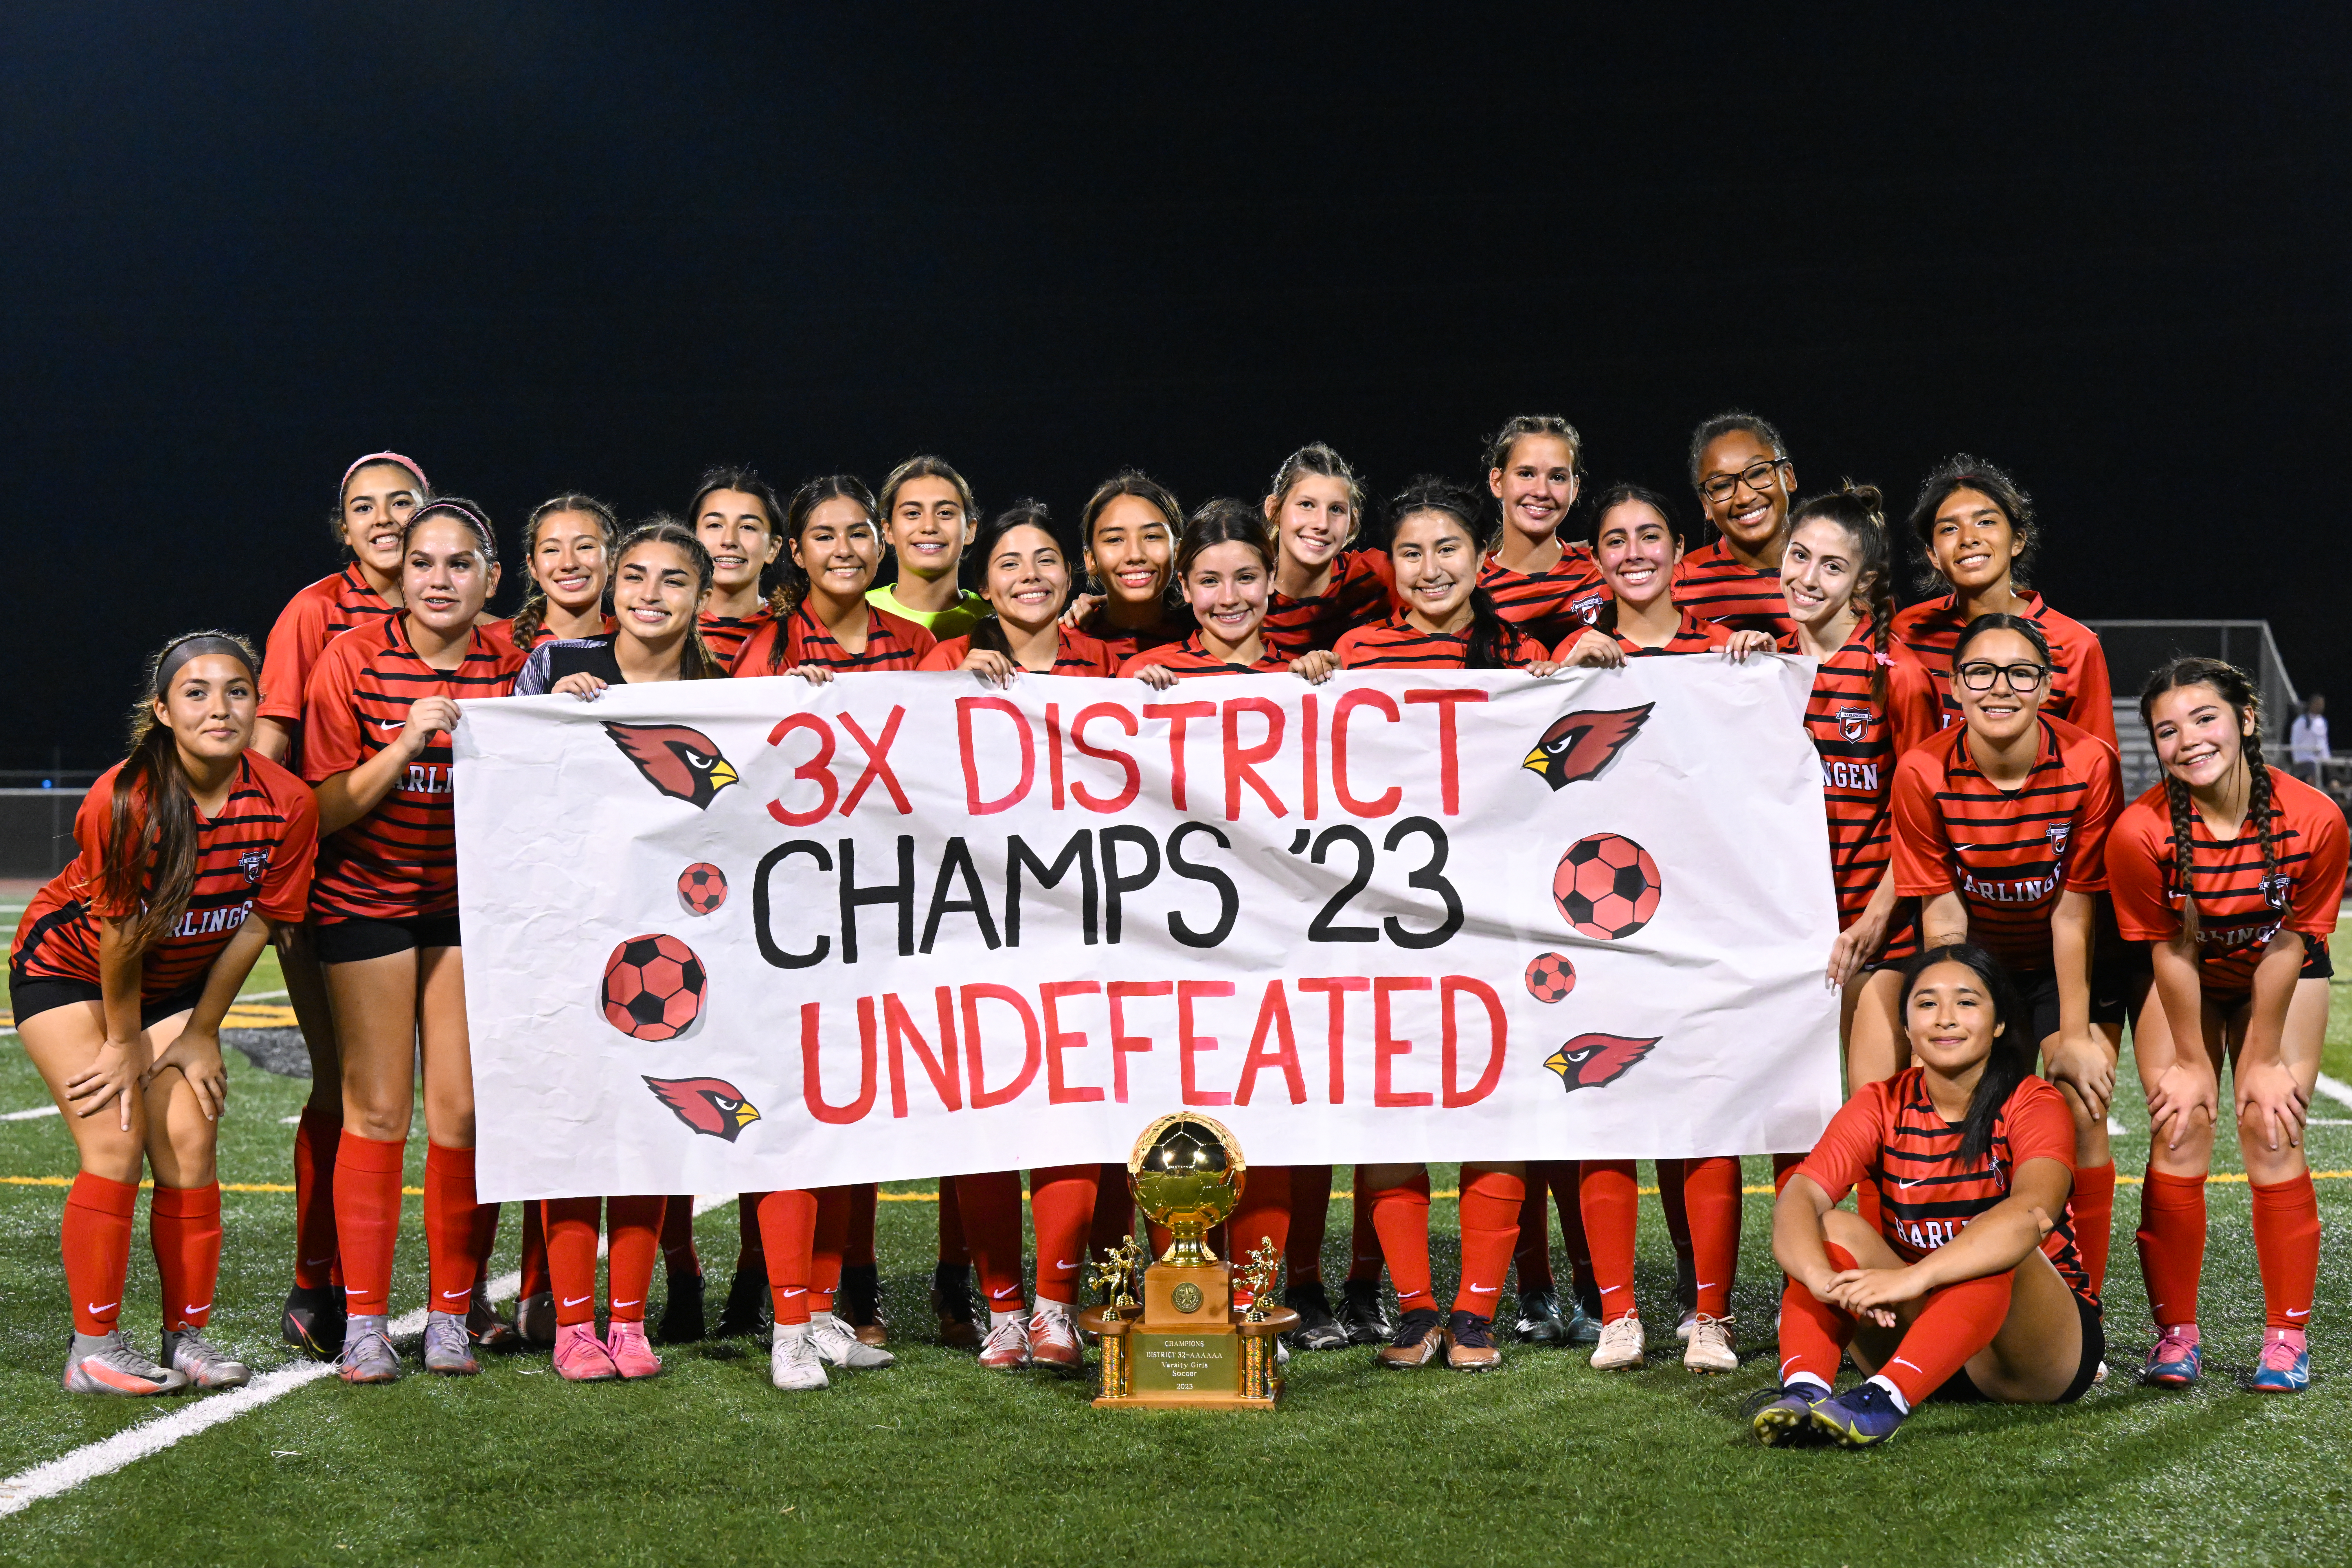 Lady Cardinals soccer team named District Champs